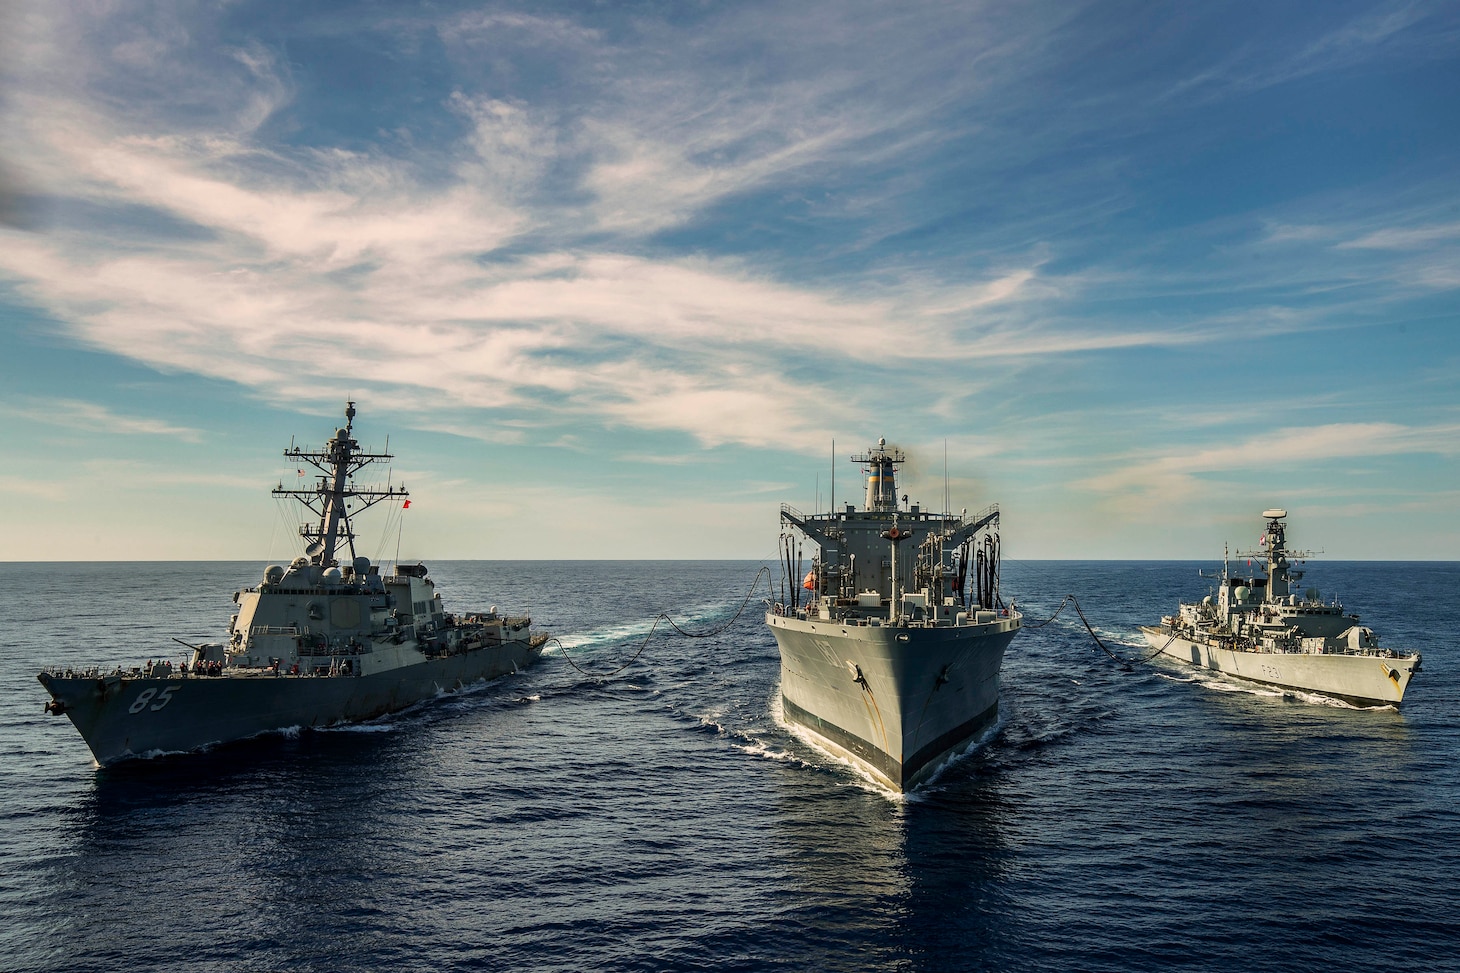 SOUTH CHINA SEA (Jan. 12, 2019) The Arleigh Burke-class guided-missile destroyer USS McCampbell (DDG 85), the Military Sealift Command fleet replenishment oiler USNS Henry J. Kaiser (T-AO 187), and the Royal Navy Type 23 ‘Duke’ Class guided-missile frigate HMS Argyll (F231) transit during a replenishment-at-sea. McCampbell is forward-deployed to the U.S. 7th Fleet area of operations in support of security and stability in the Indo-Pacific region.